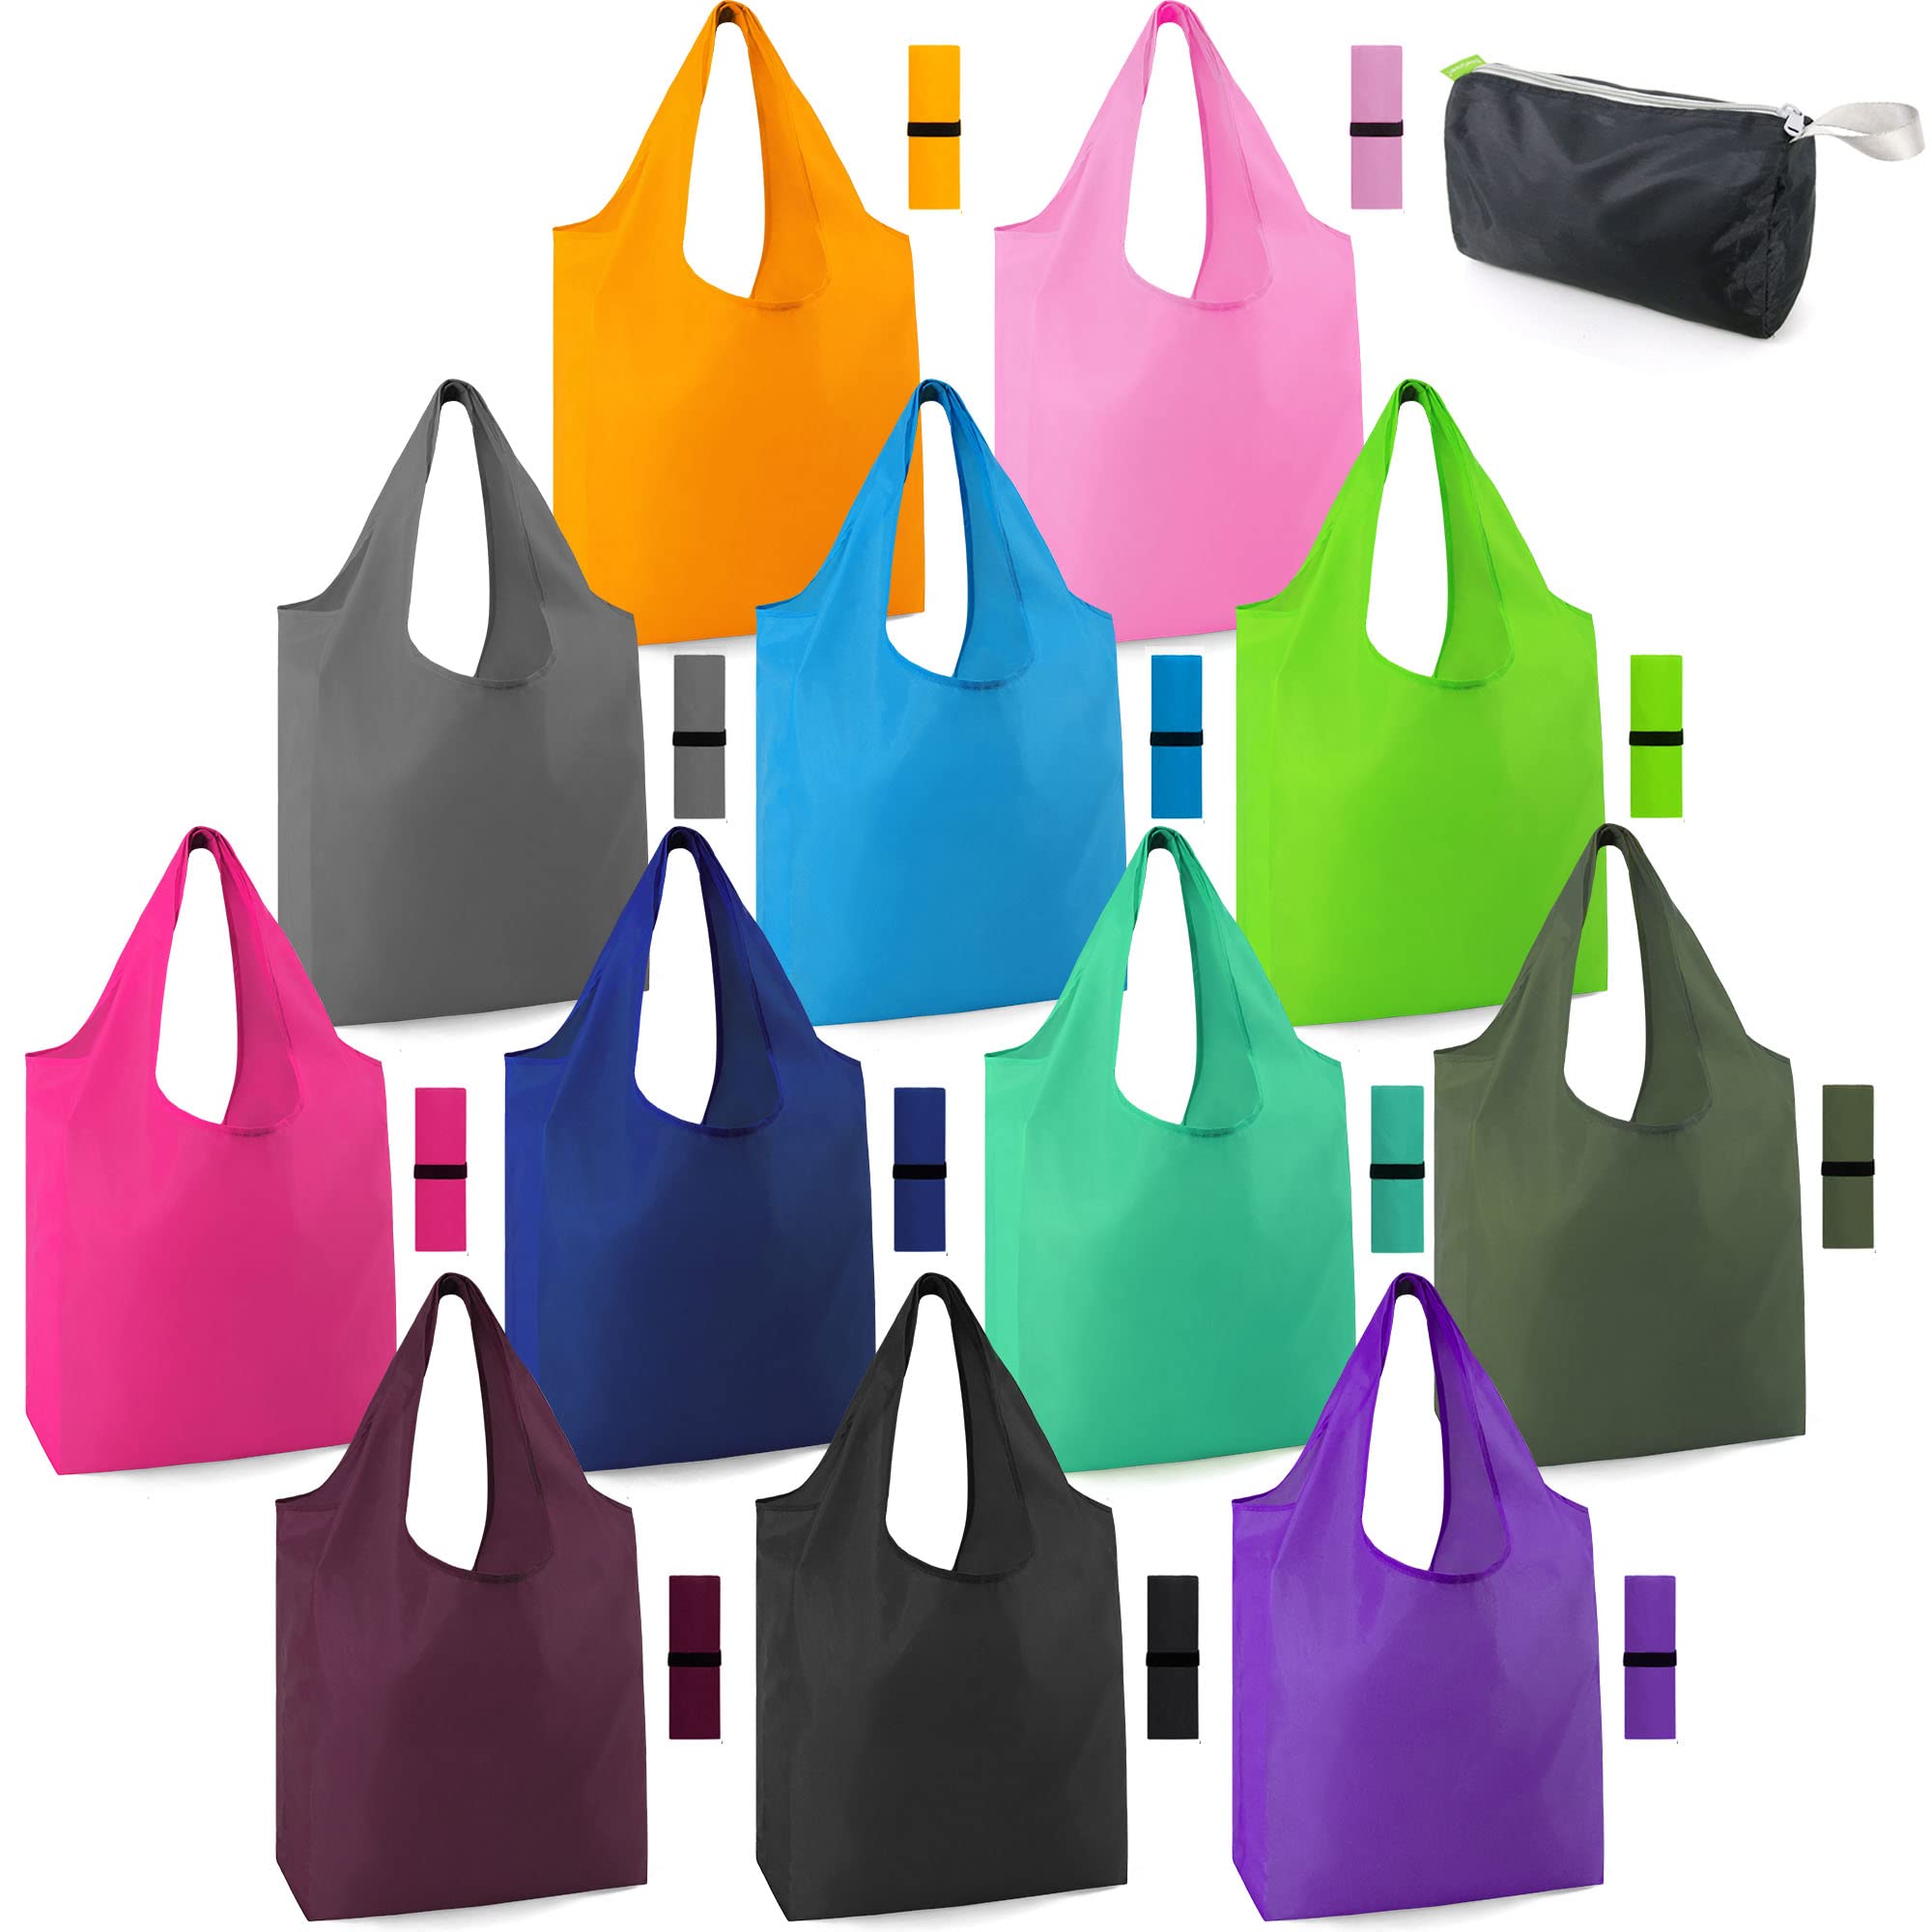 5 Pack Reusable Grocery Bags, Folding Shopping Bag fits in Pocket, Washable  Waterproof Nylon holds Heavy Groceries